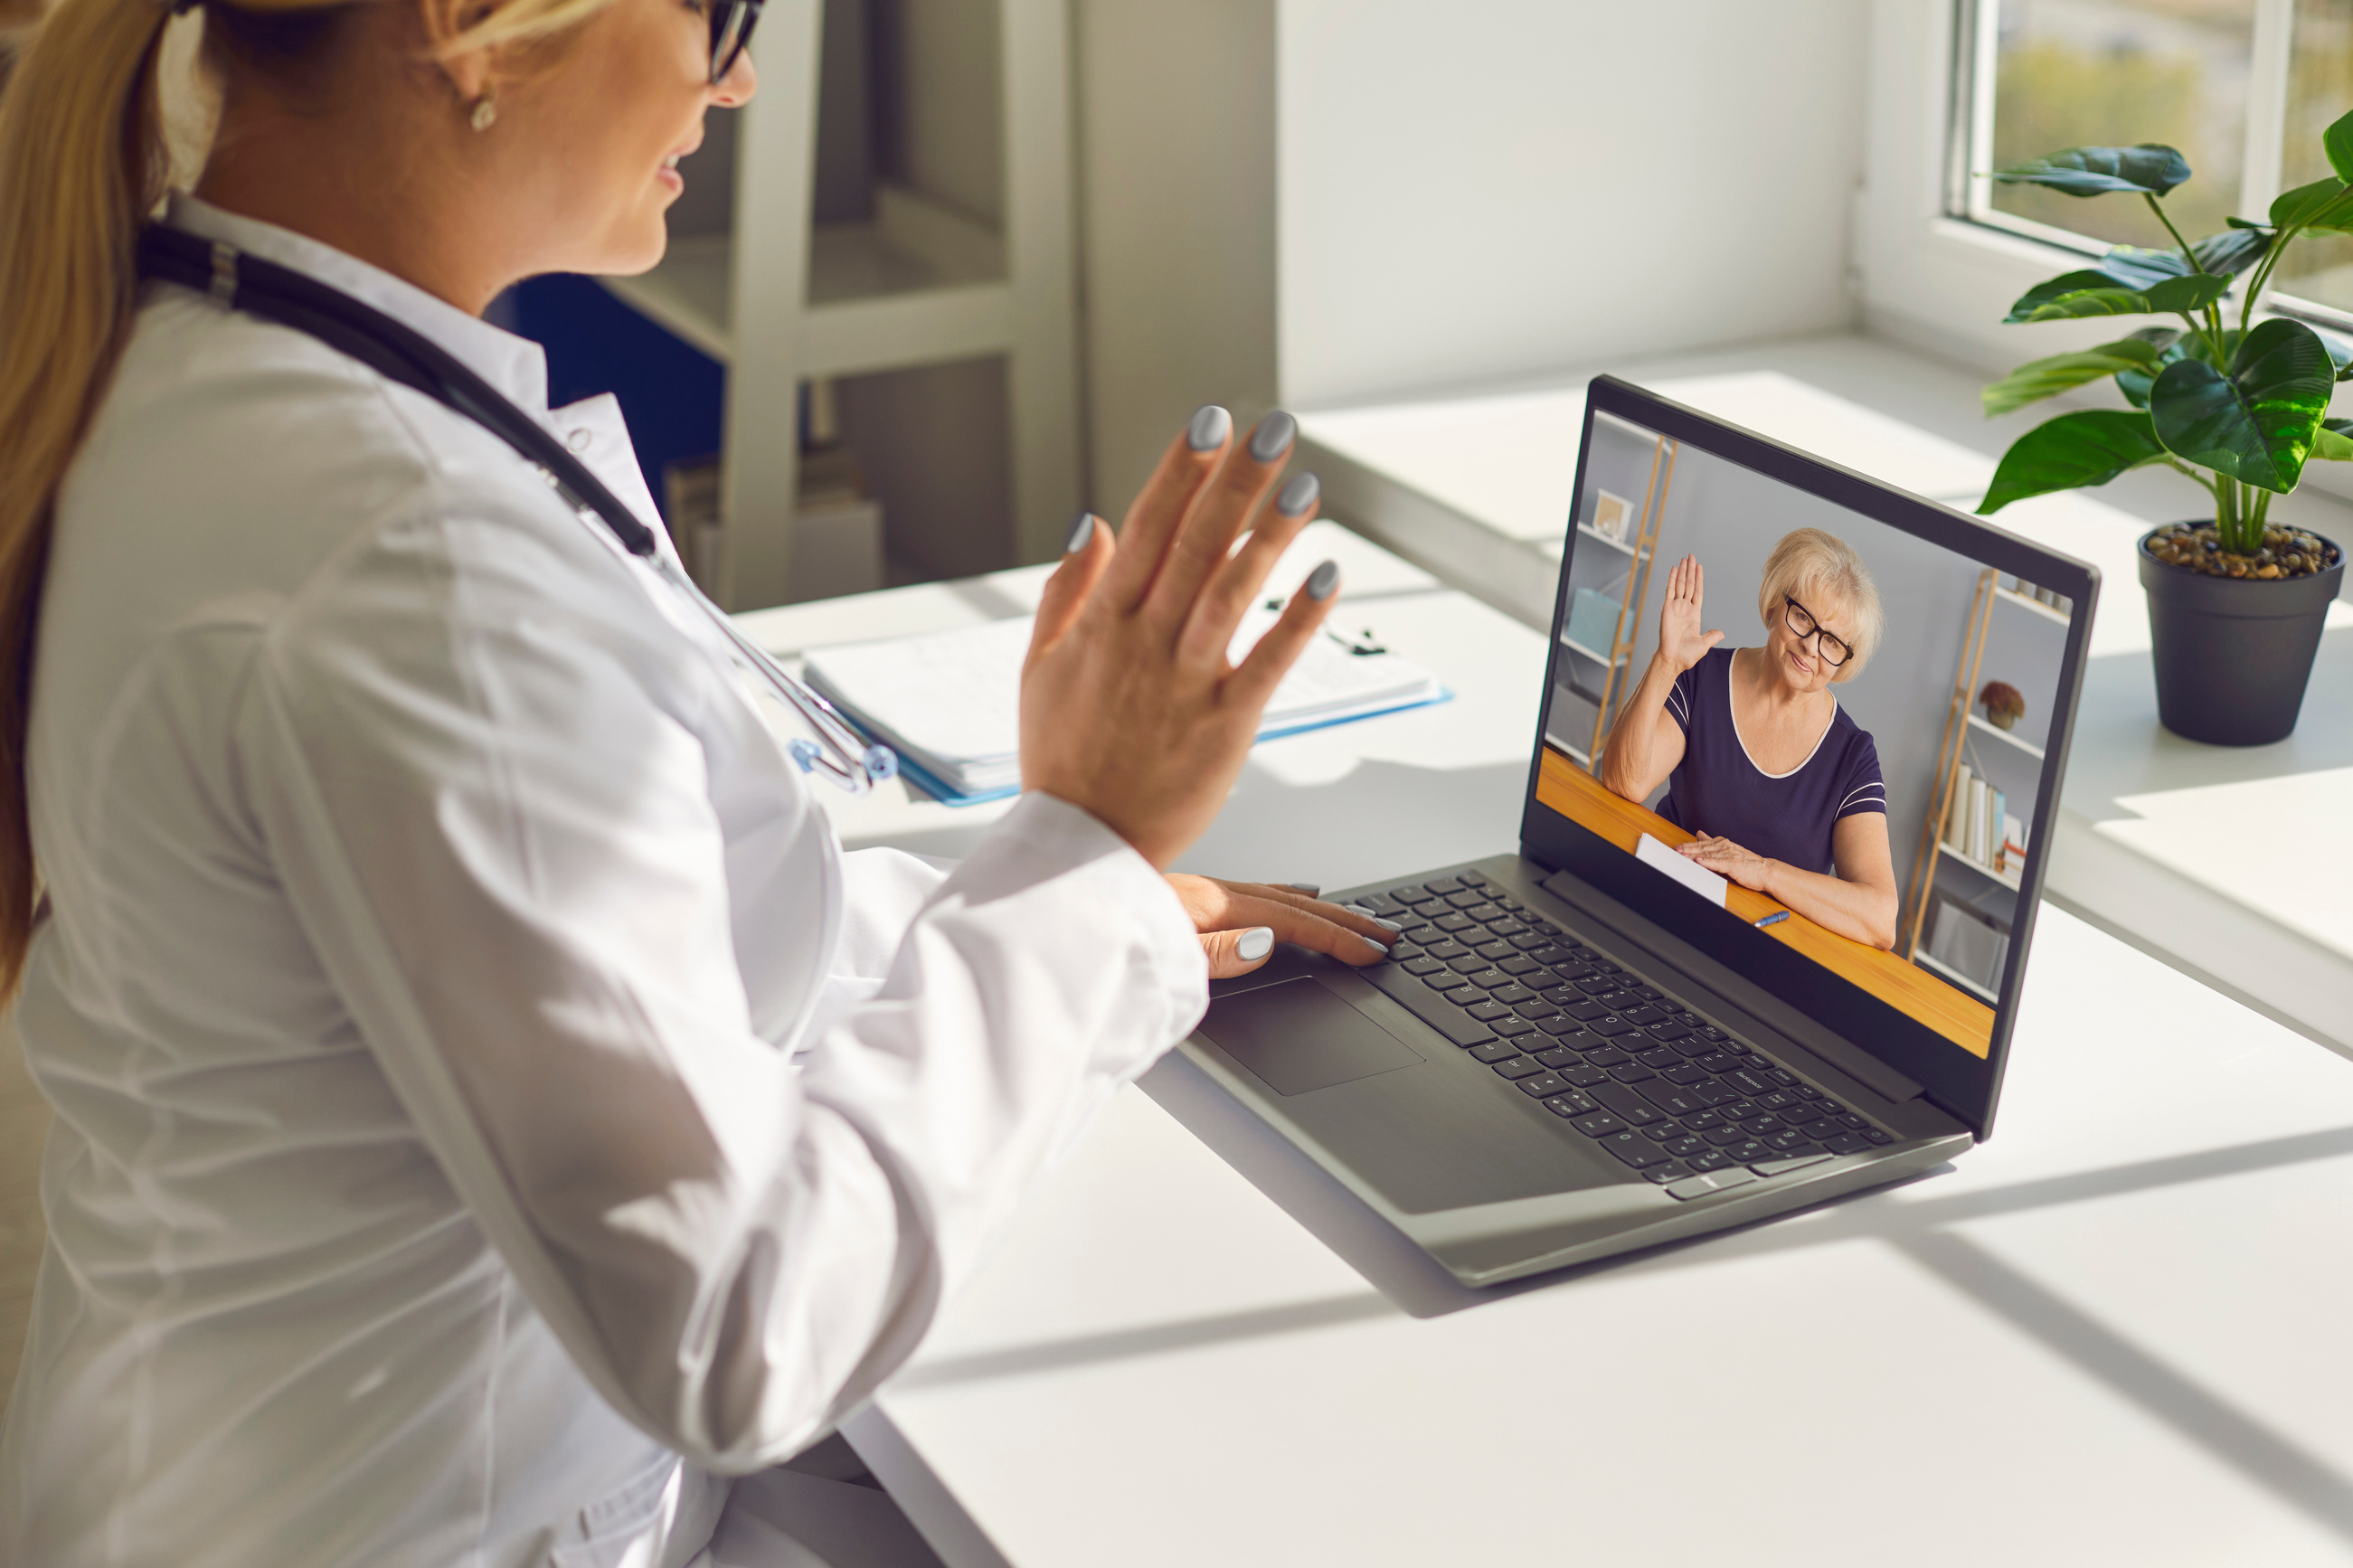 Doctor Waving Hand at Laptop Screen Saying Hello to Senior Woman during Online Consultation